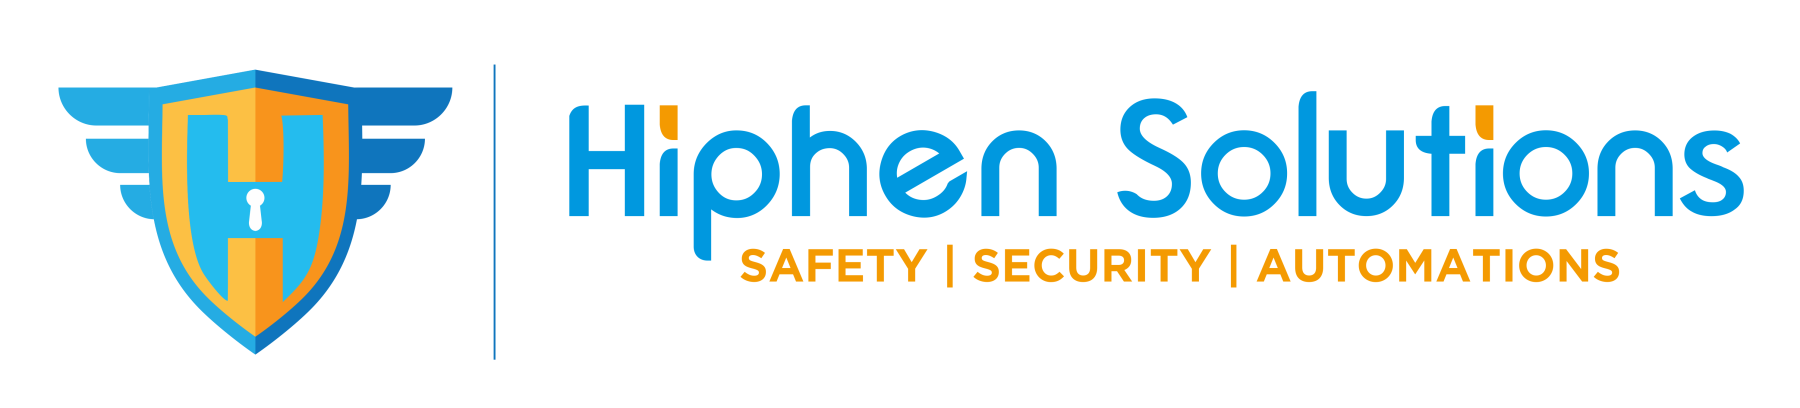 Hiphen Solutions